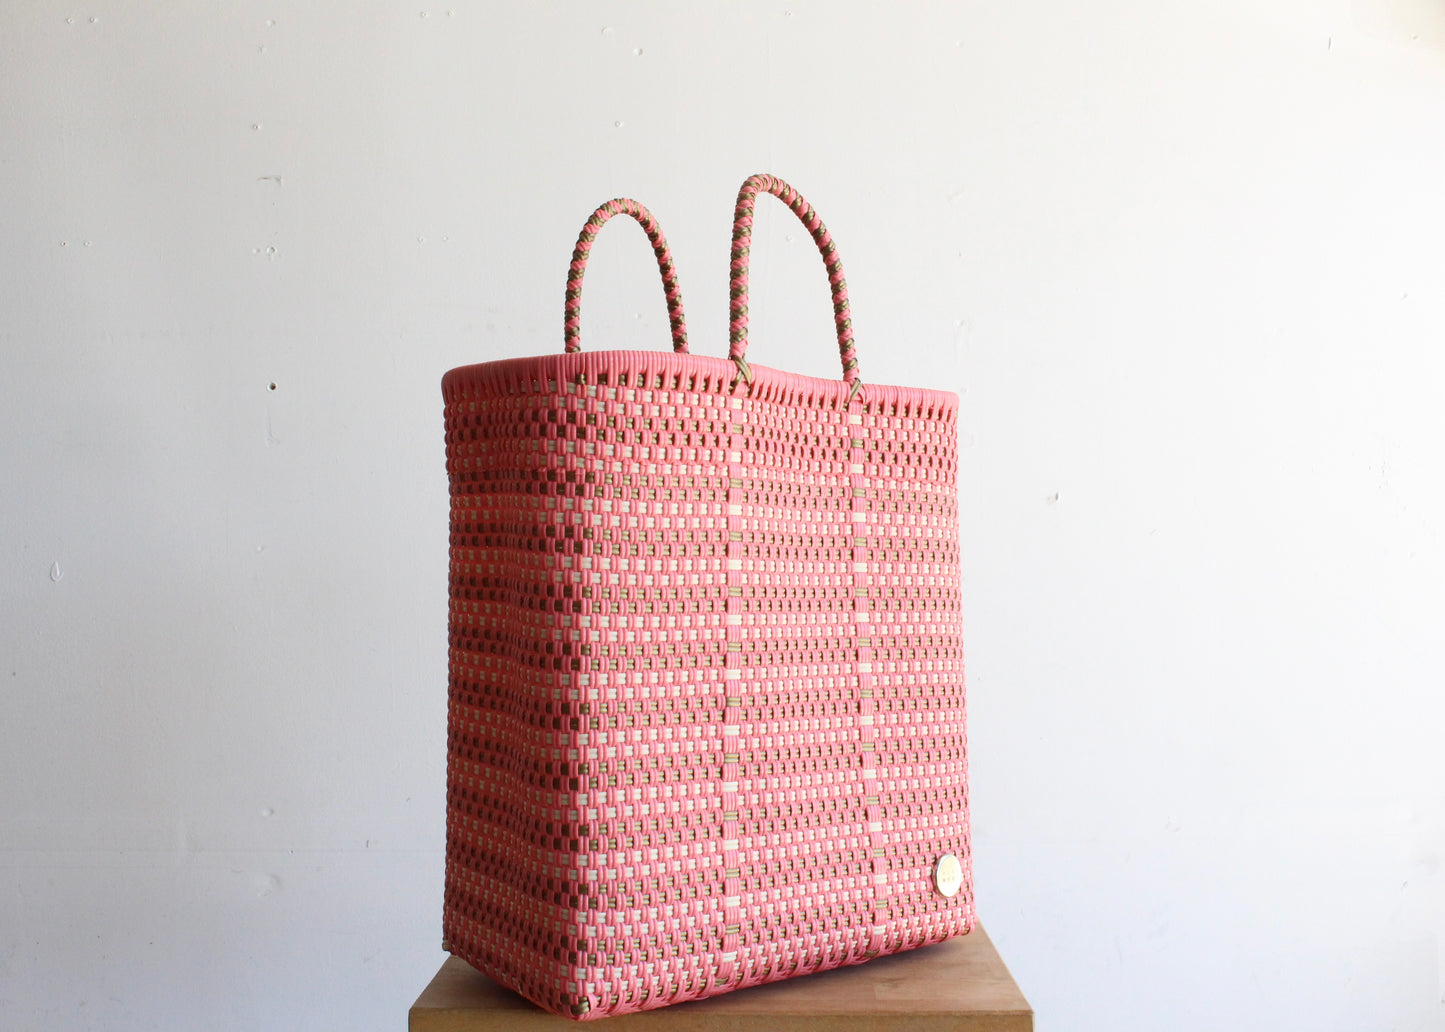 Coral & Gold handwoven Mexican Tote by MexiMexi